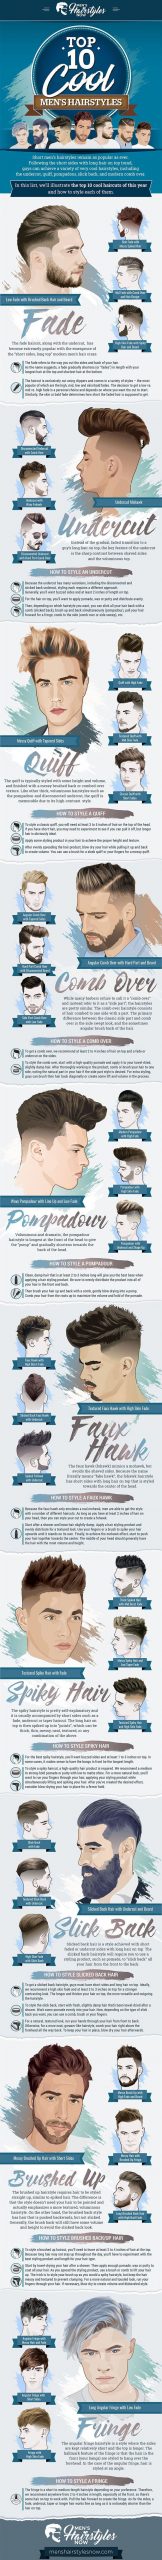 27-Cool-Hairstyles-For-Men-2019-Guide.jpg